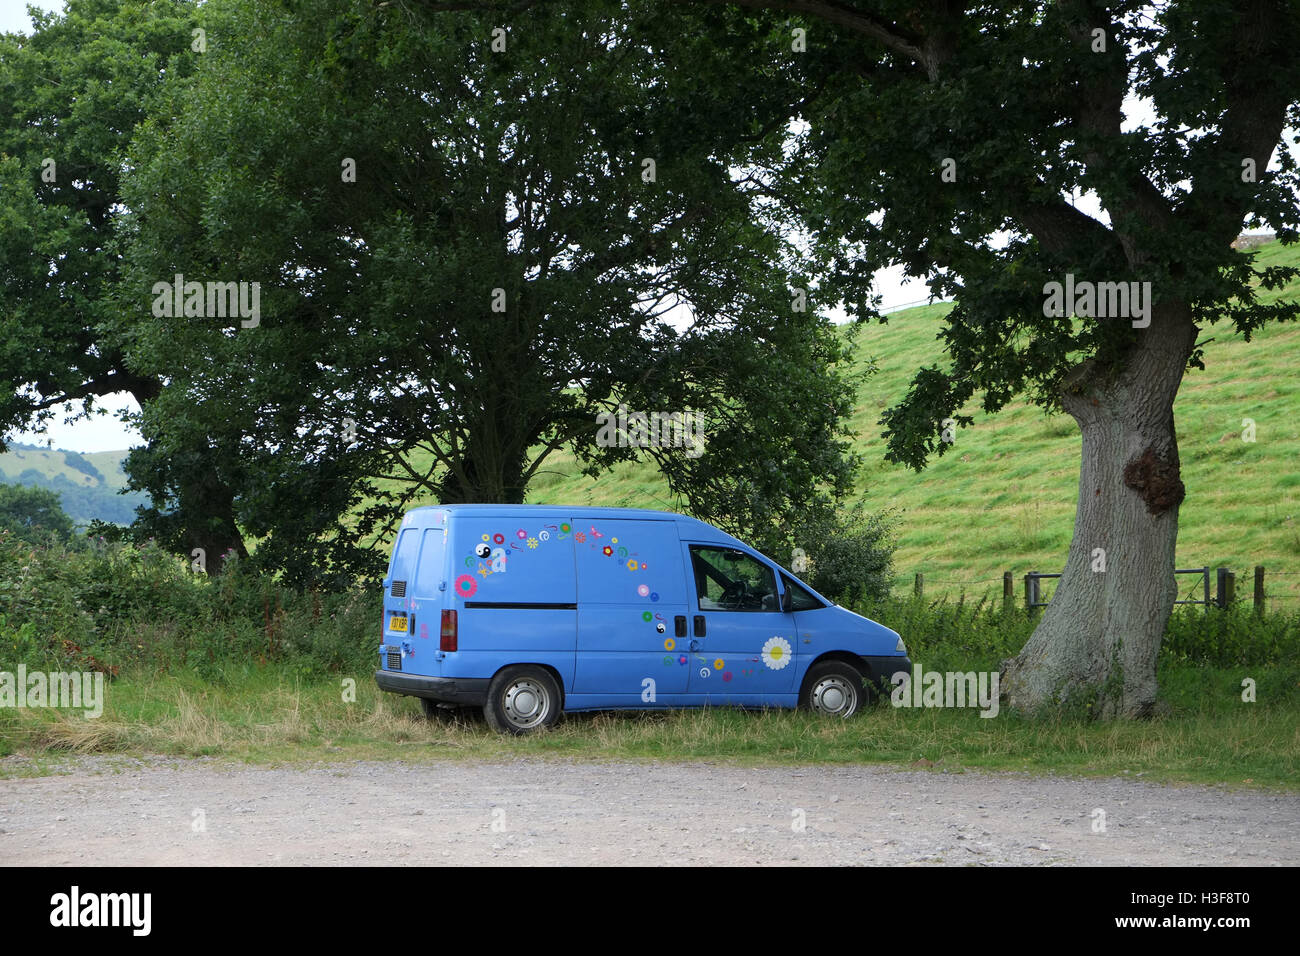 14th August 2016, old blue van used as a make shift camper. Stock Photo